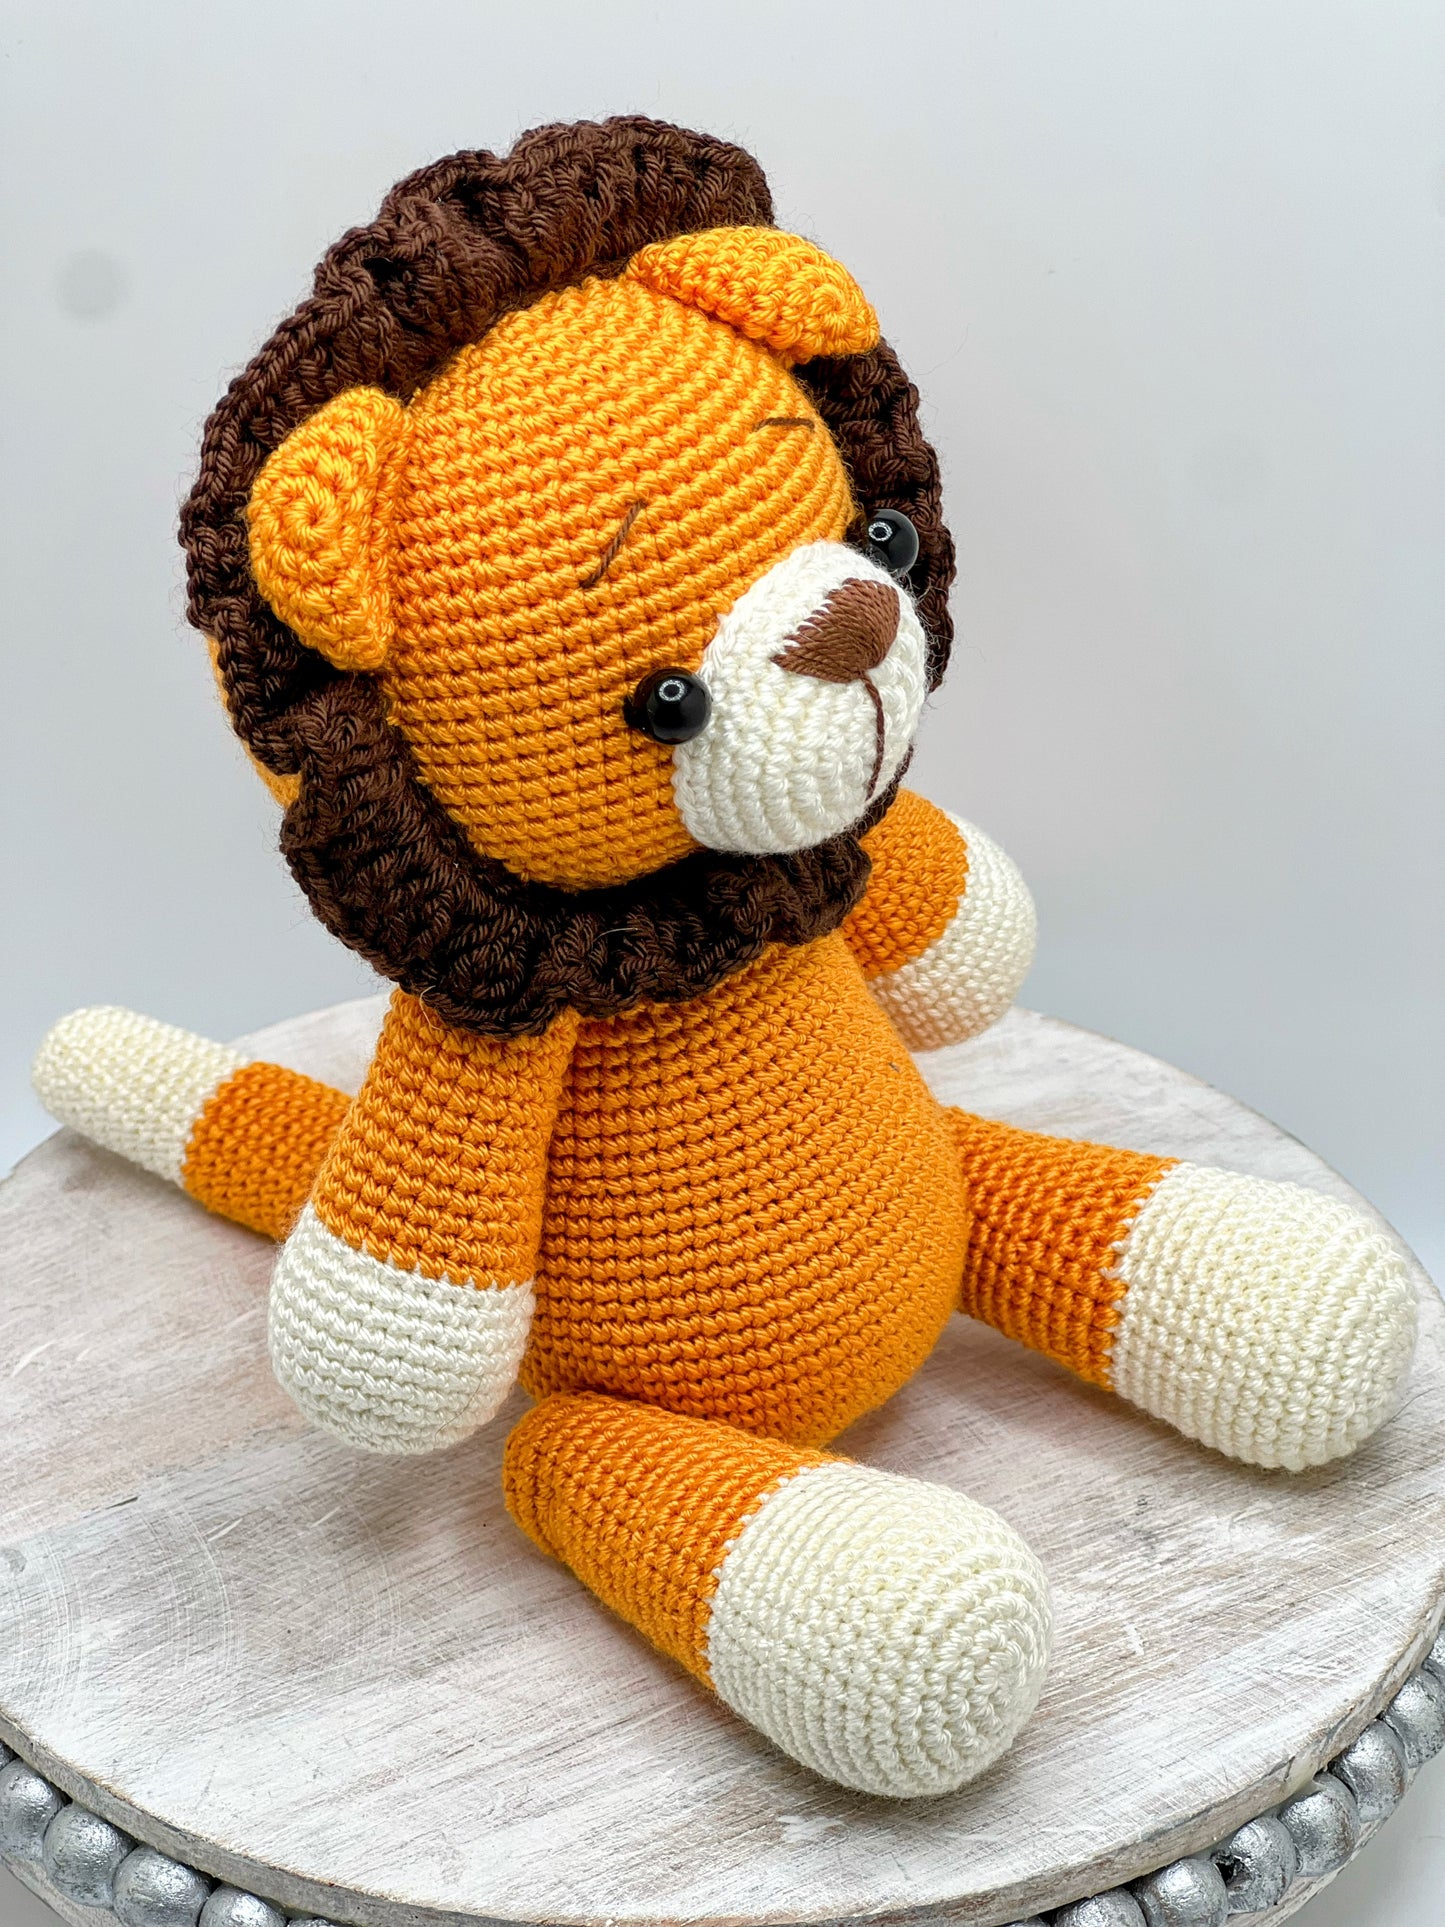 Stuffed Lion Toy With Moving Legs - Crochet Knitted Amigurumi Toy